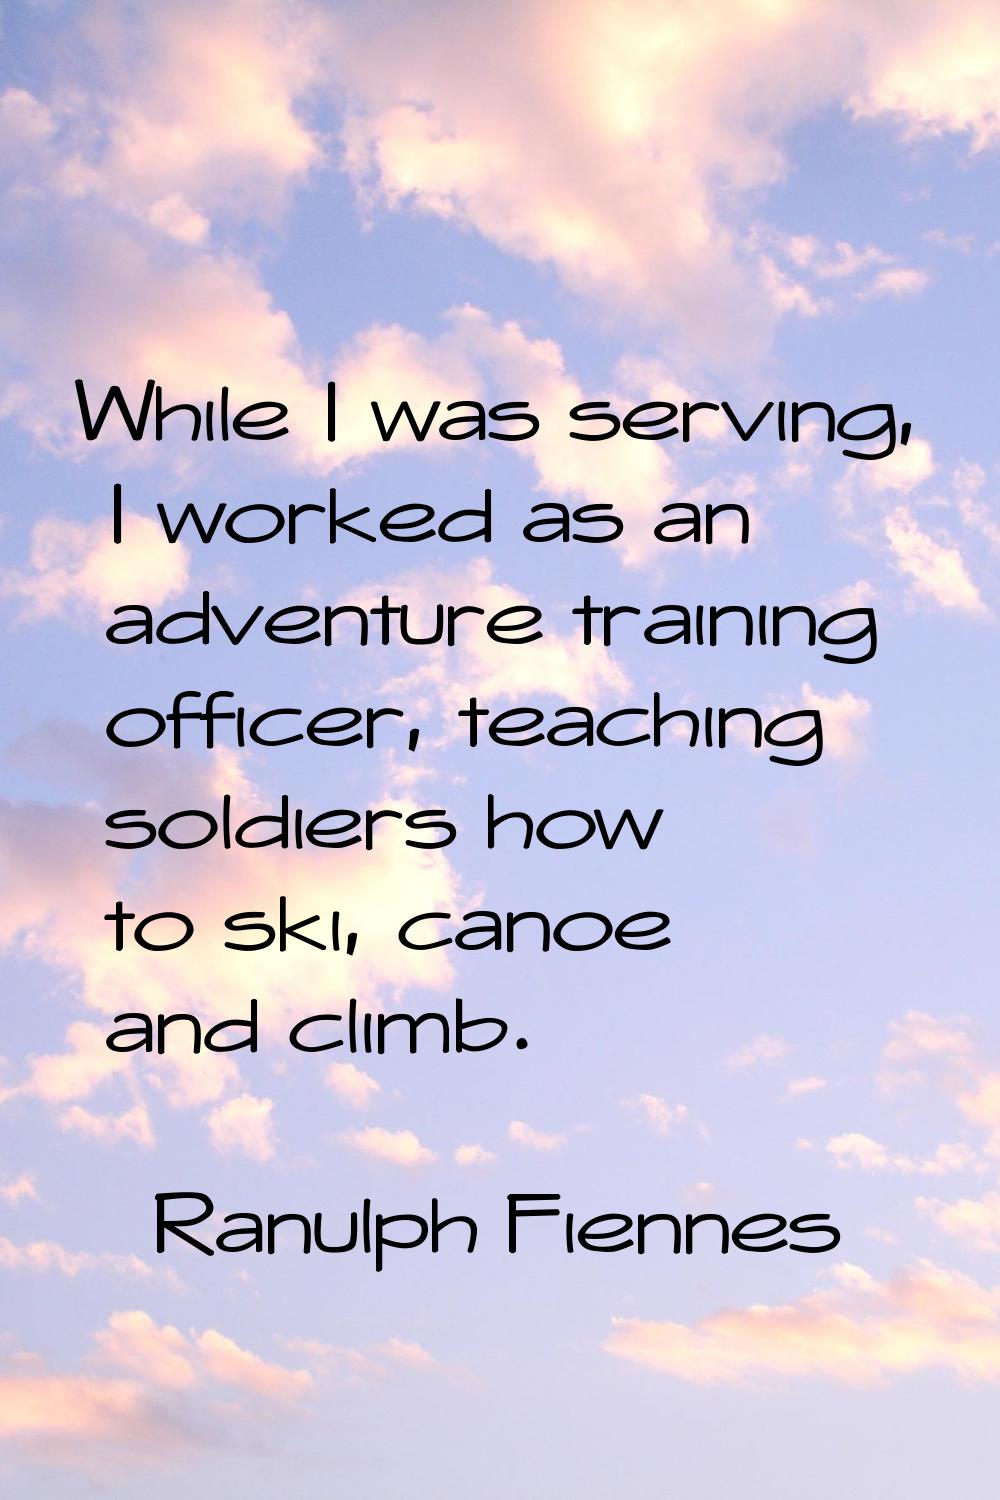 While I was serving, I worked as an adventure training officer, teaching soldiers how to ski, canoe